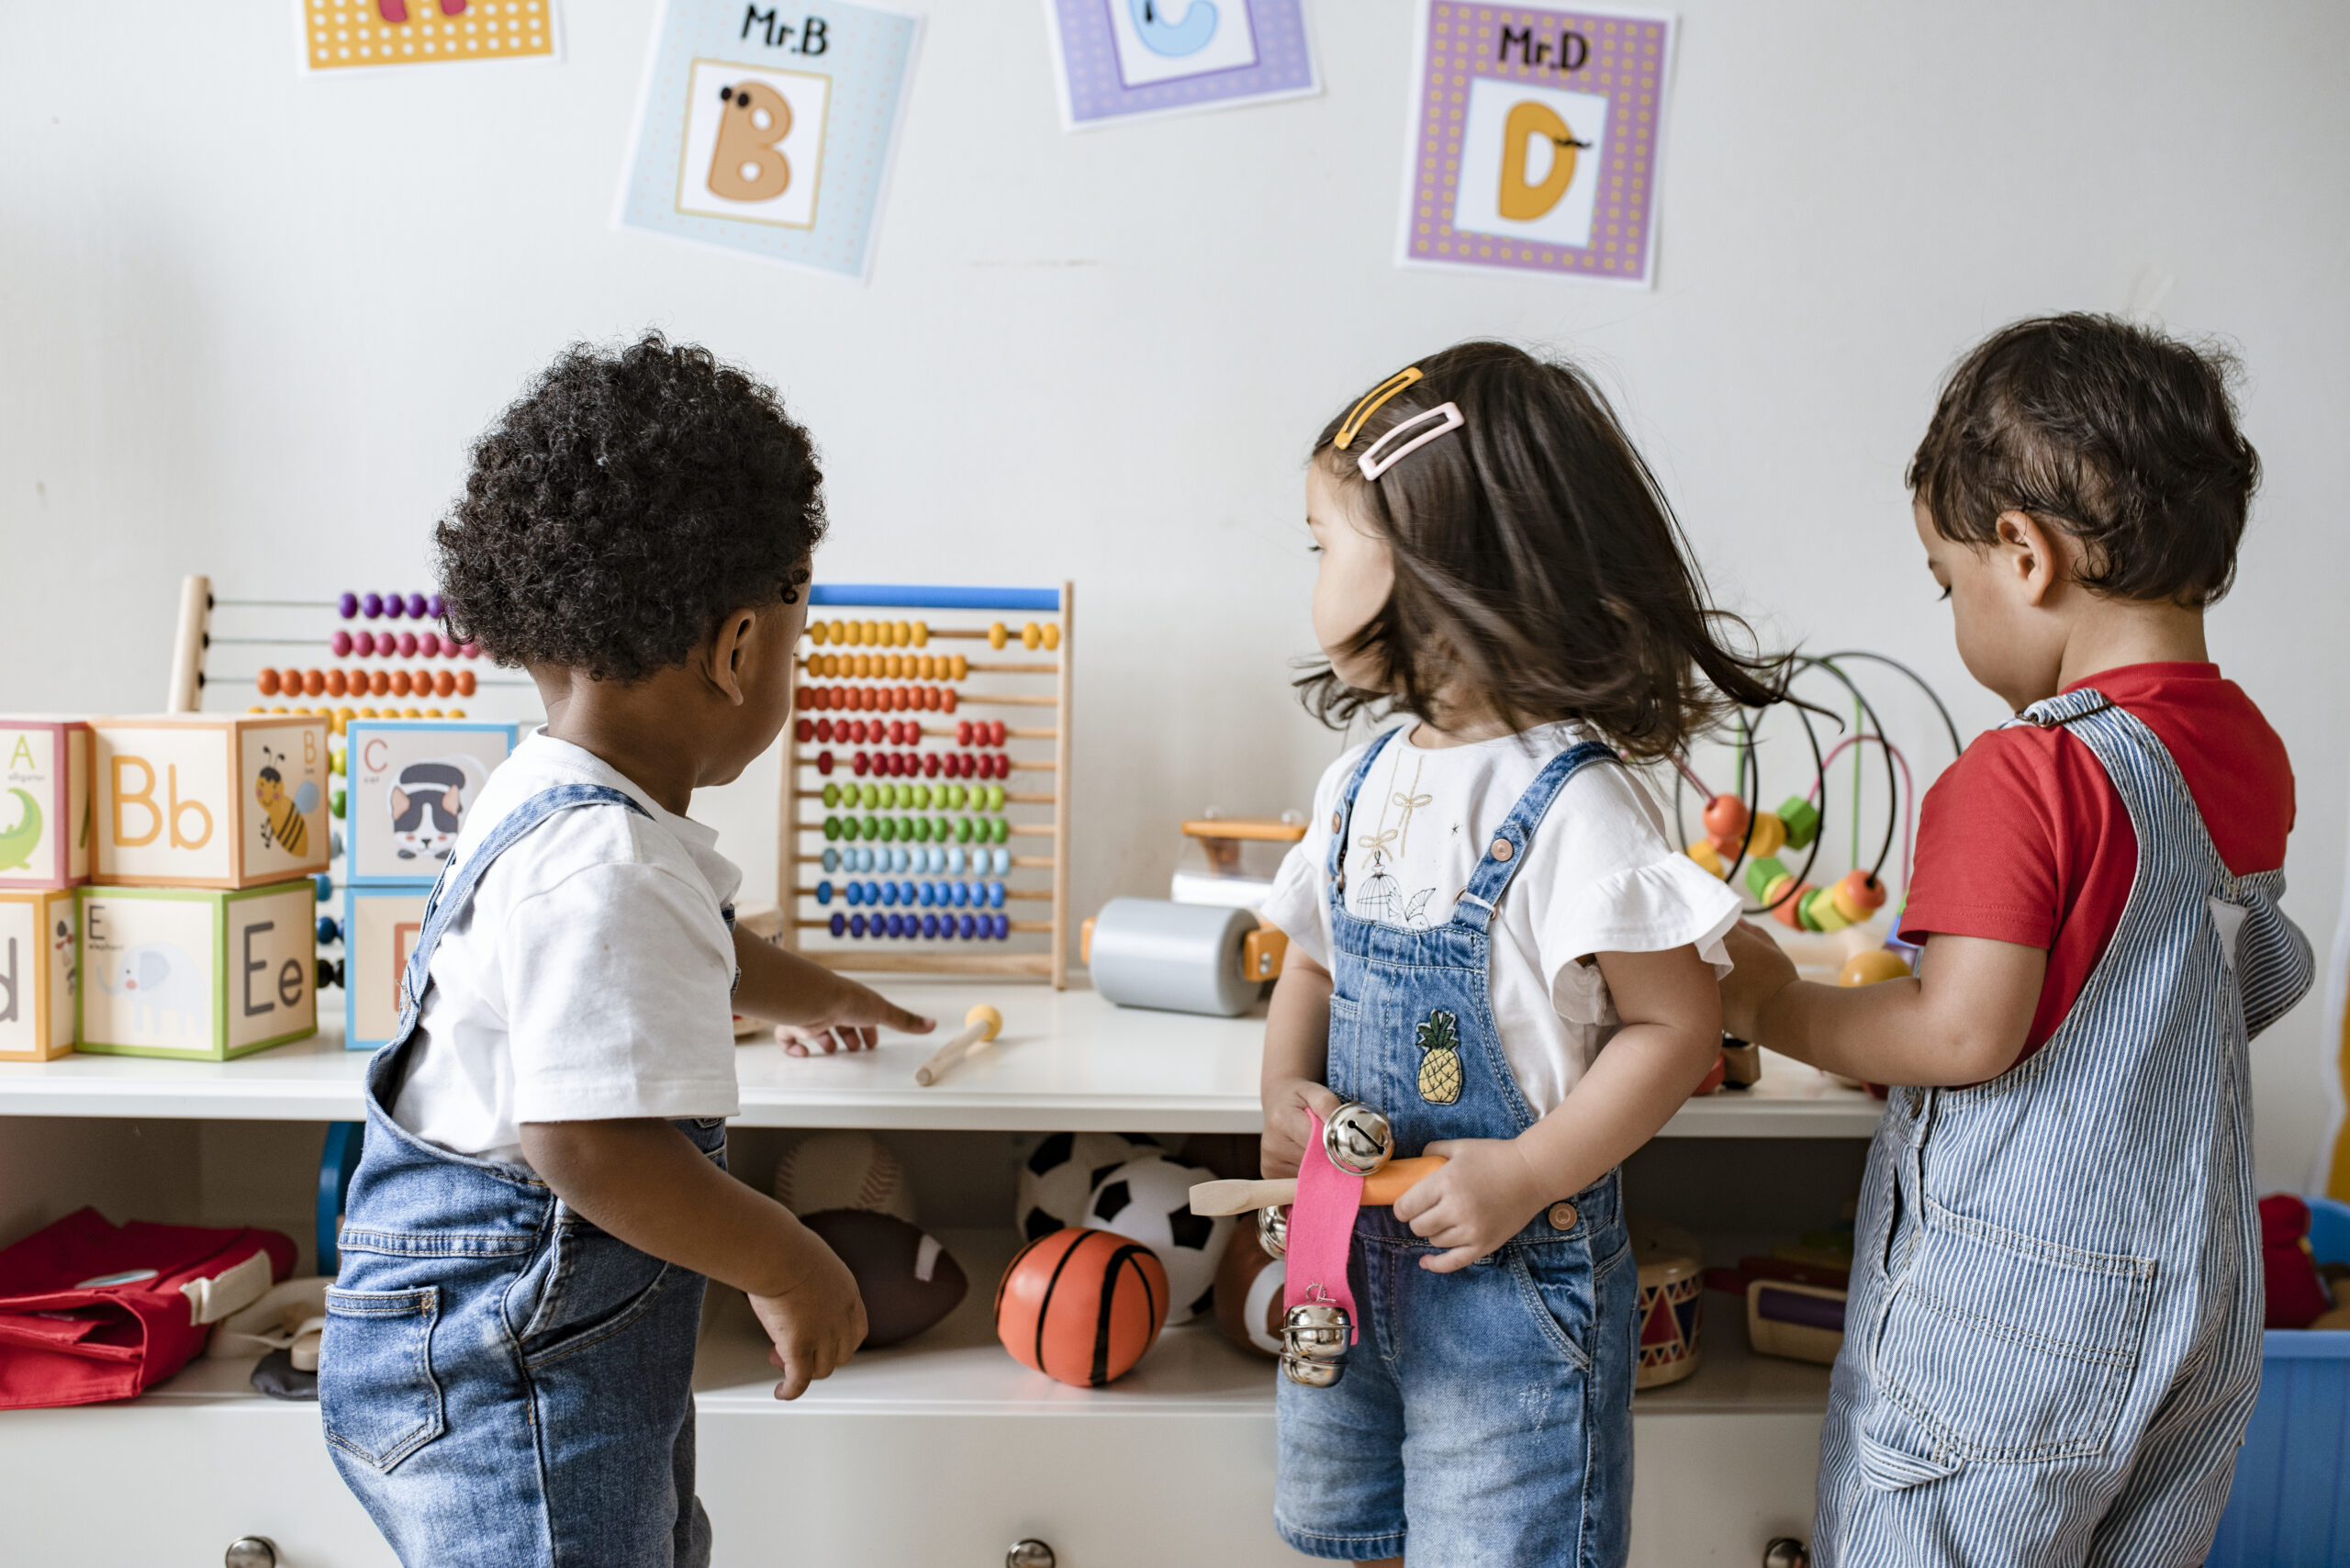 Three young children play with educational toys in a classroom setting.